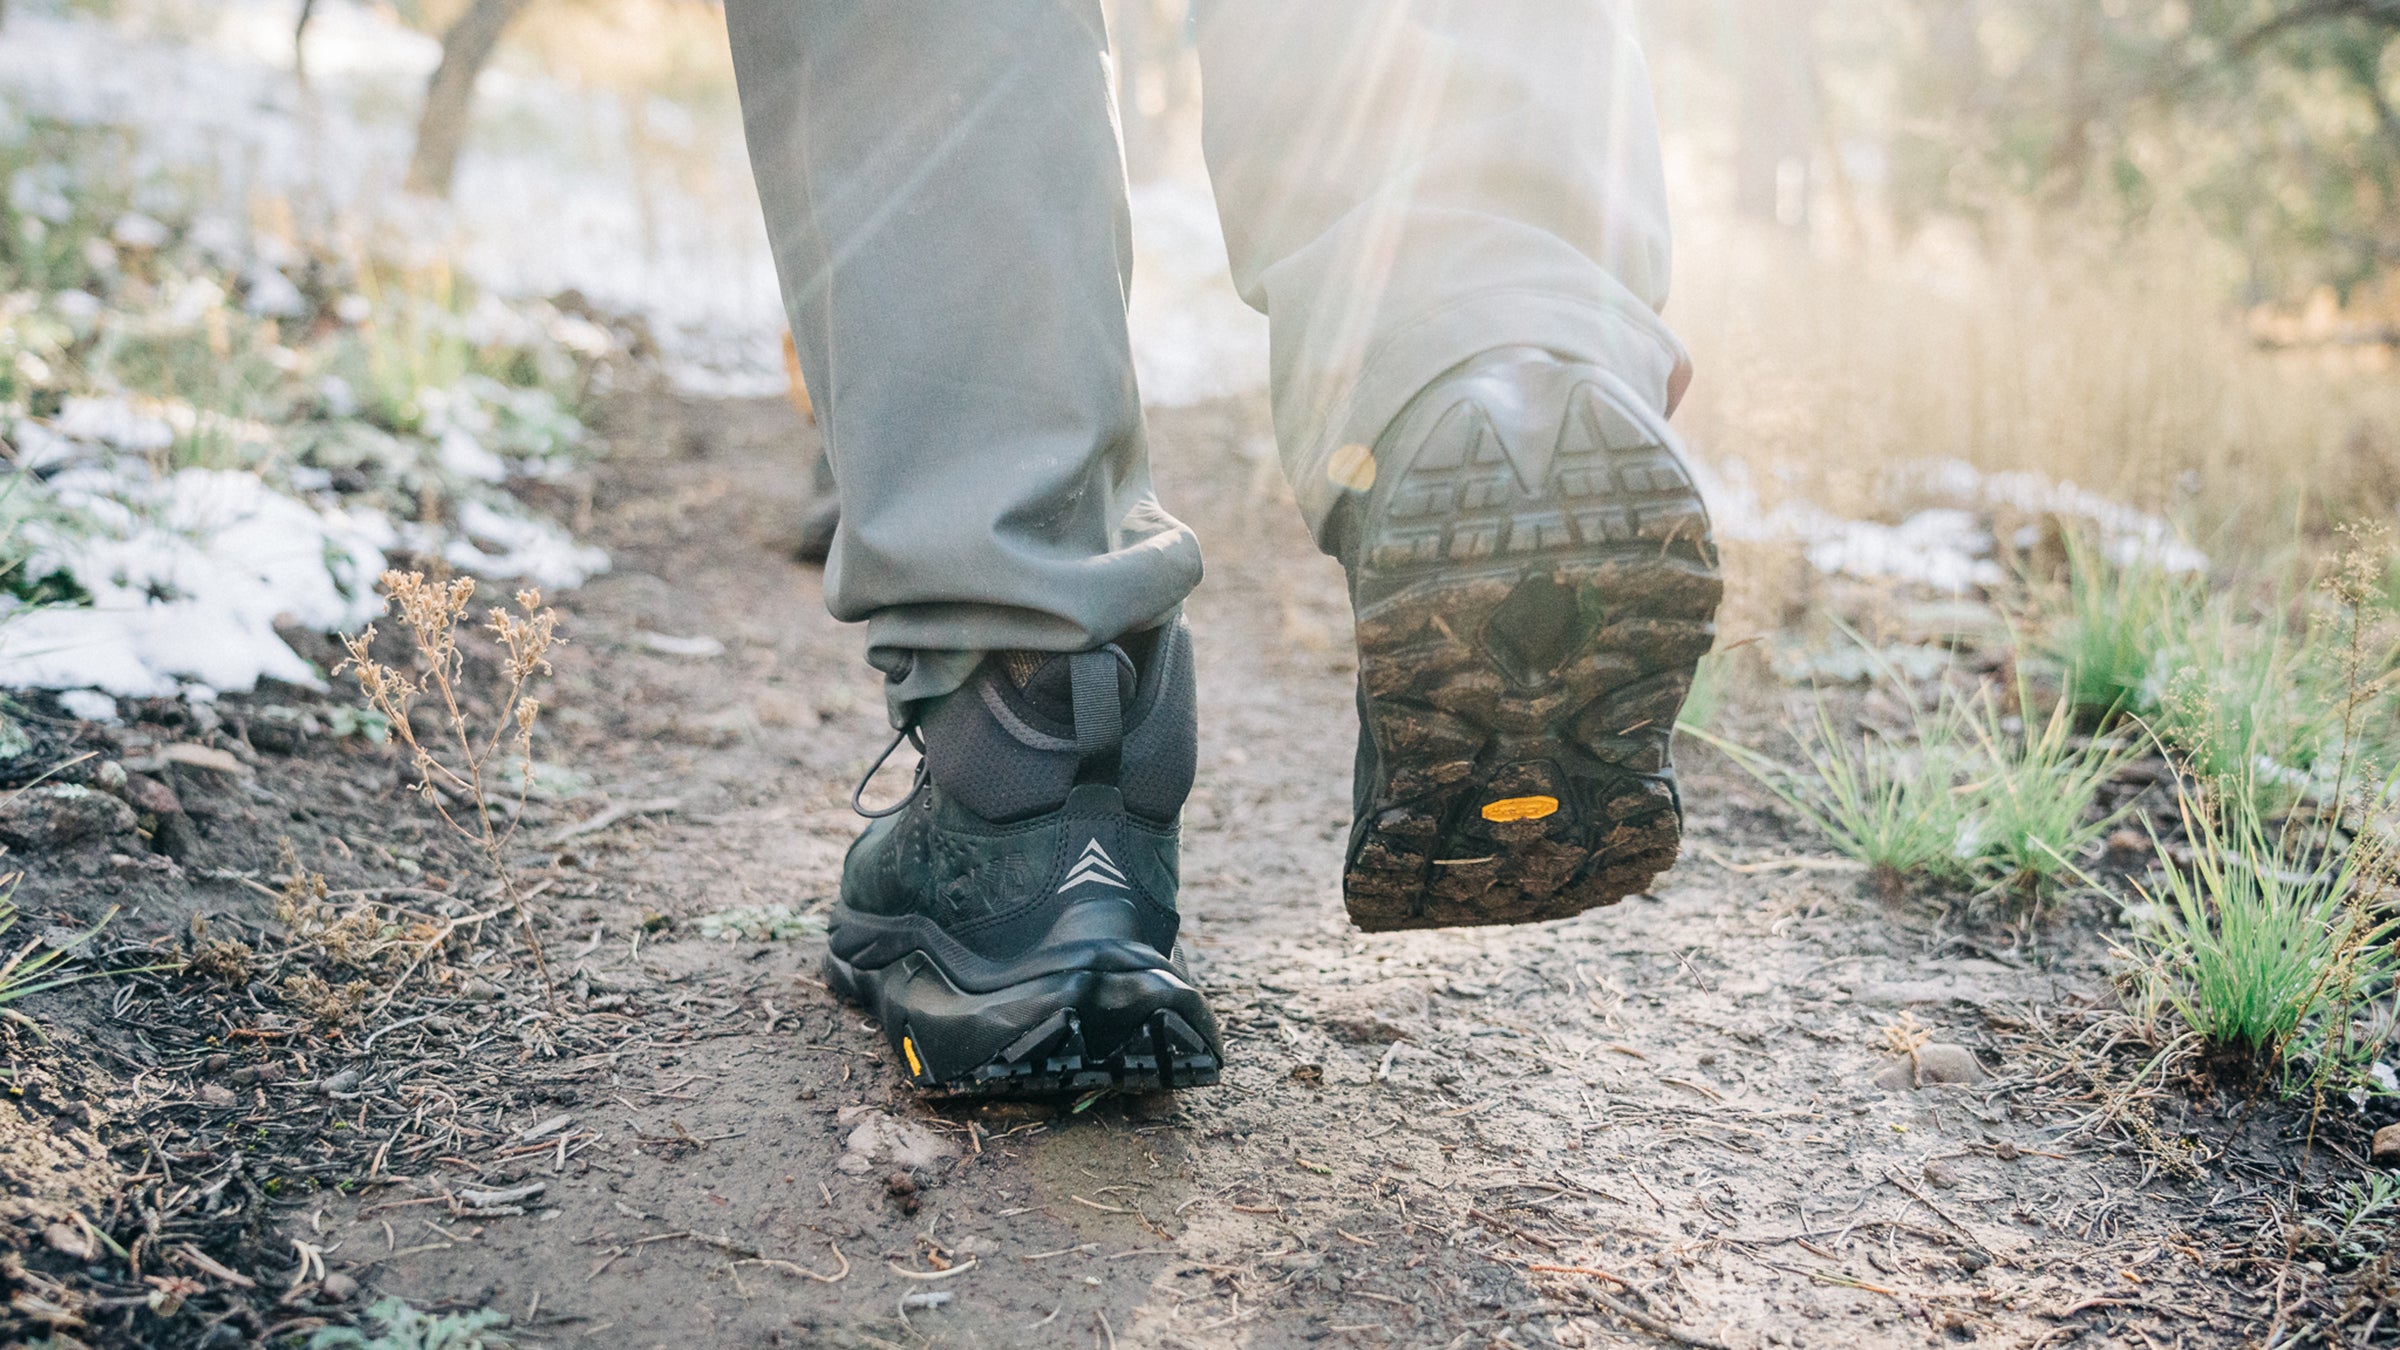 The 15 Best Waterproof Hiking Boots for Damp Days Outdoors: Danner